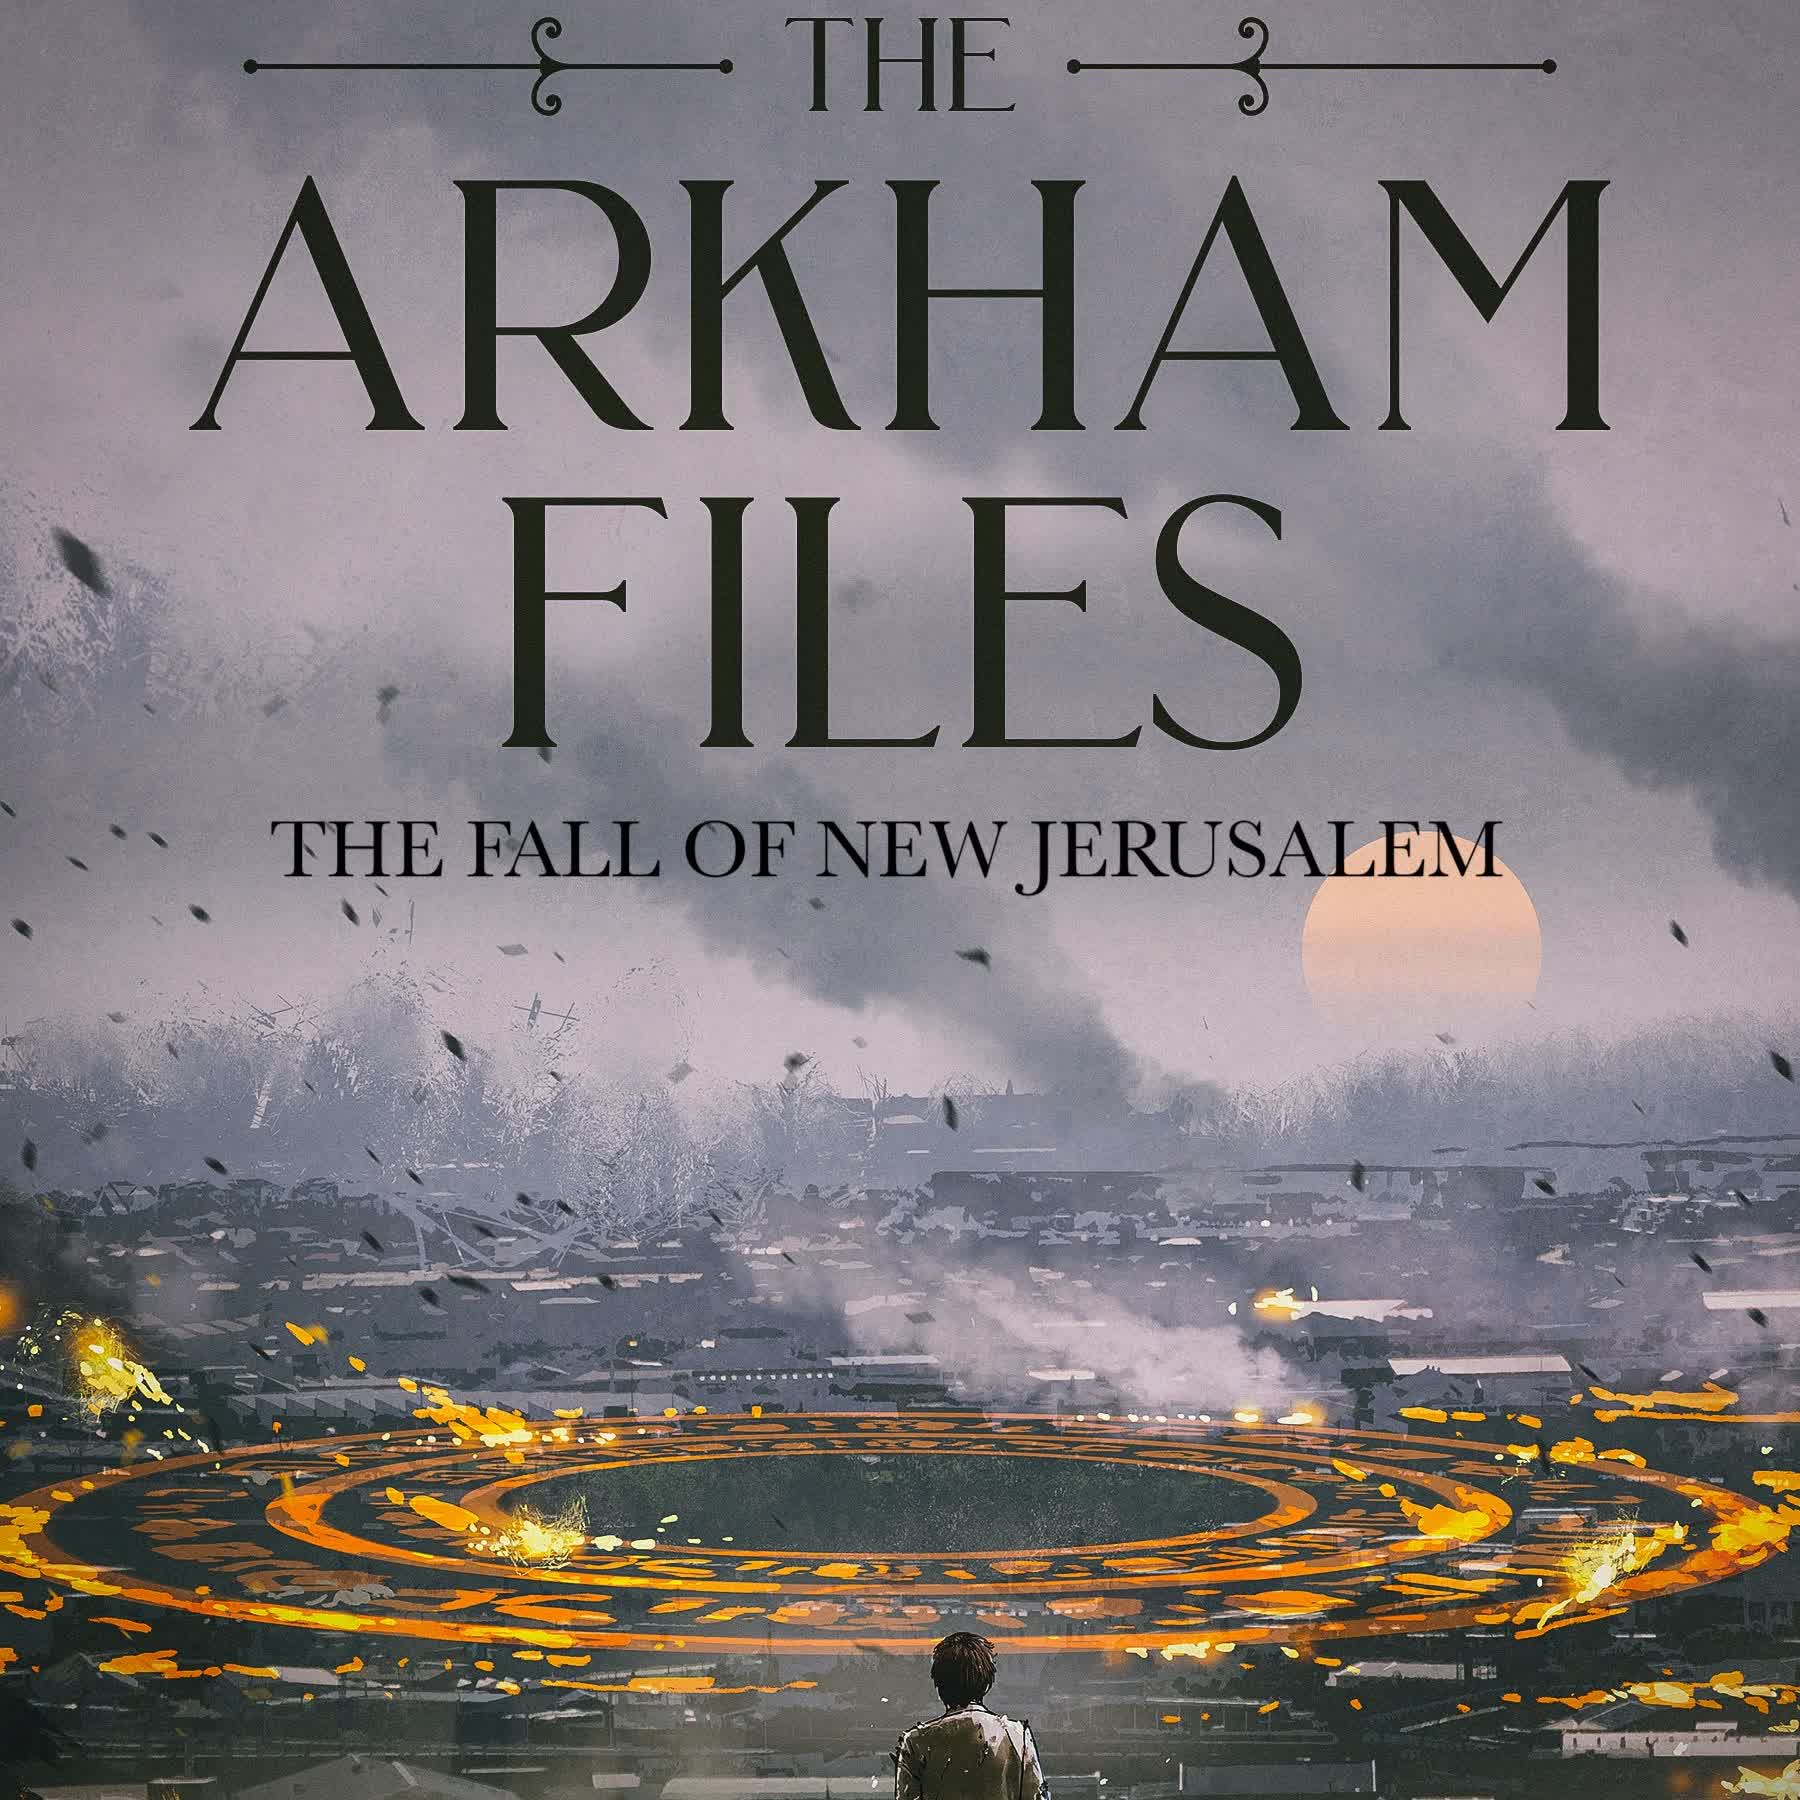 The Fall of New Jerusalem 313: The Arrival